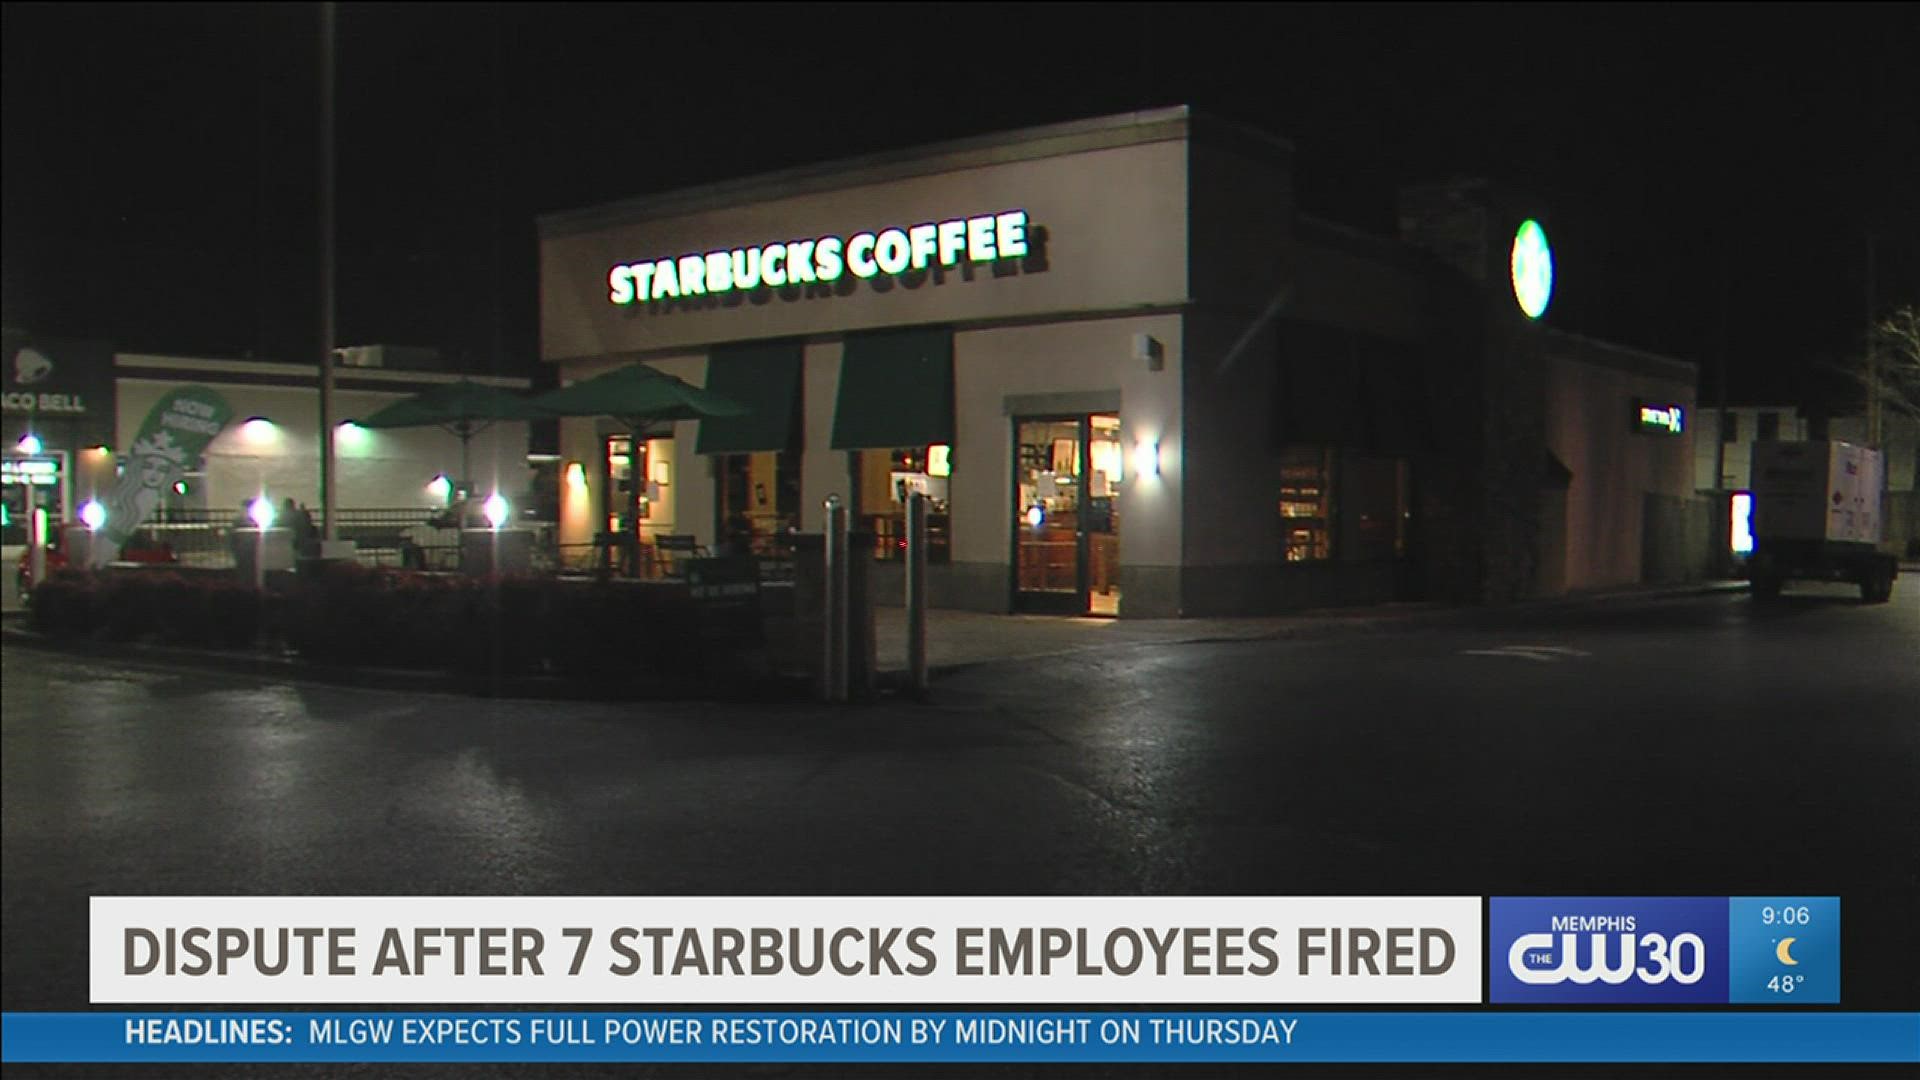 ABC News reports the company was notified of "several safety and security violations" that took place at the store.